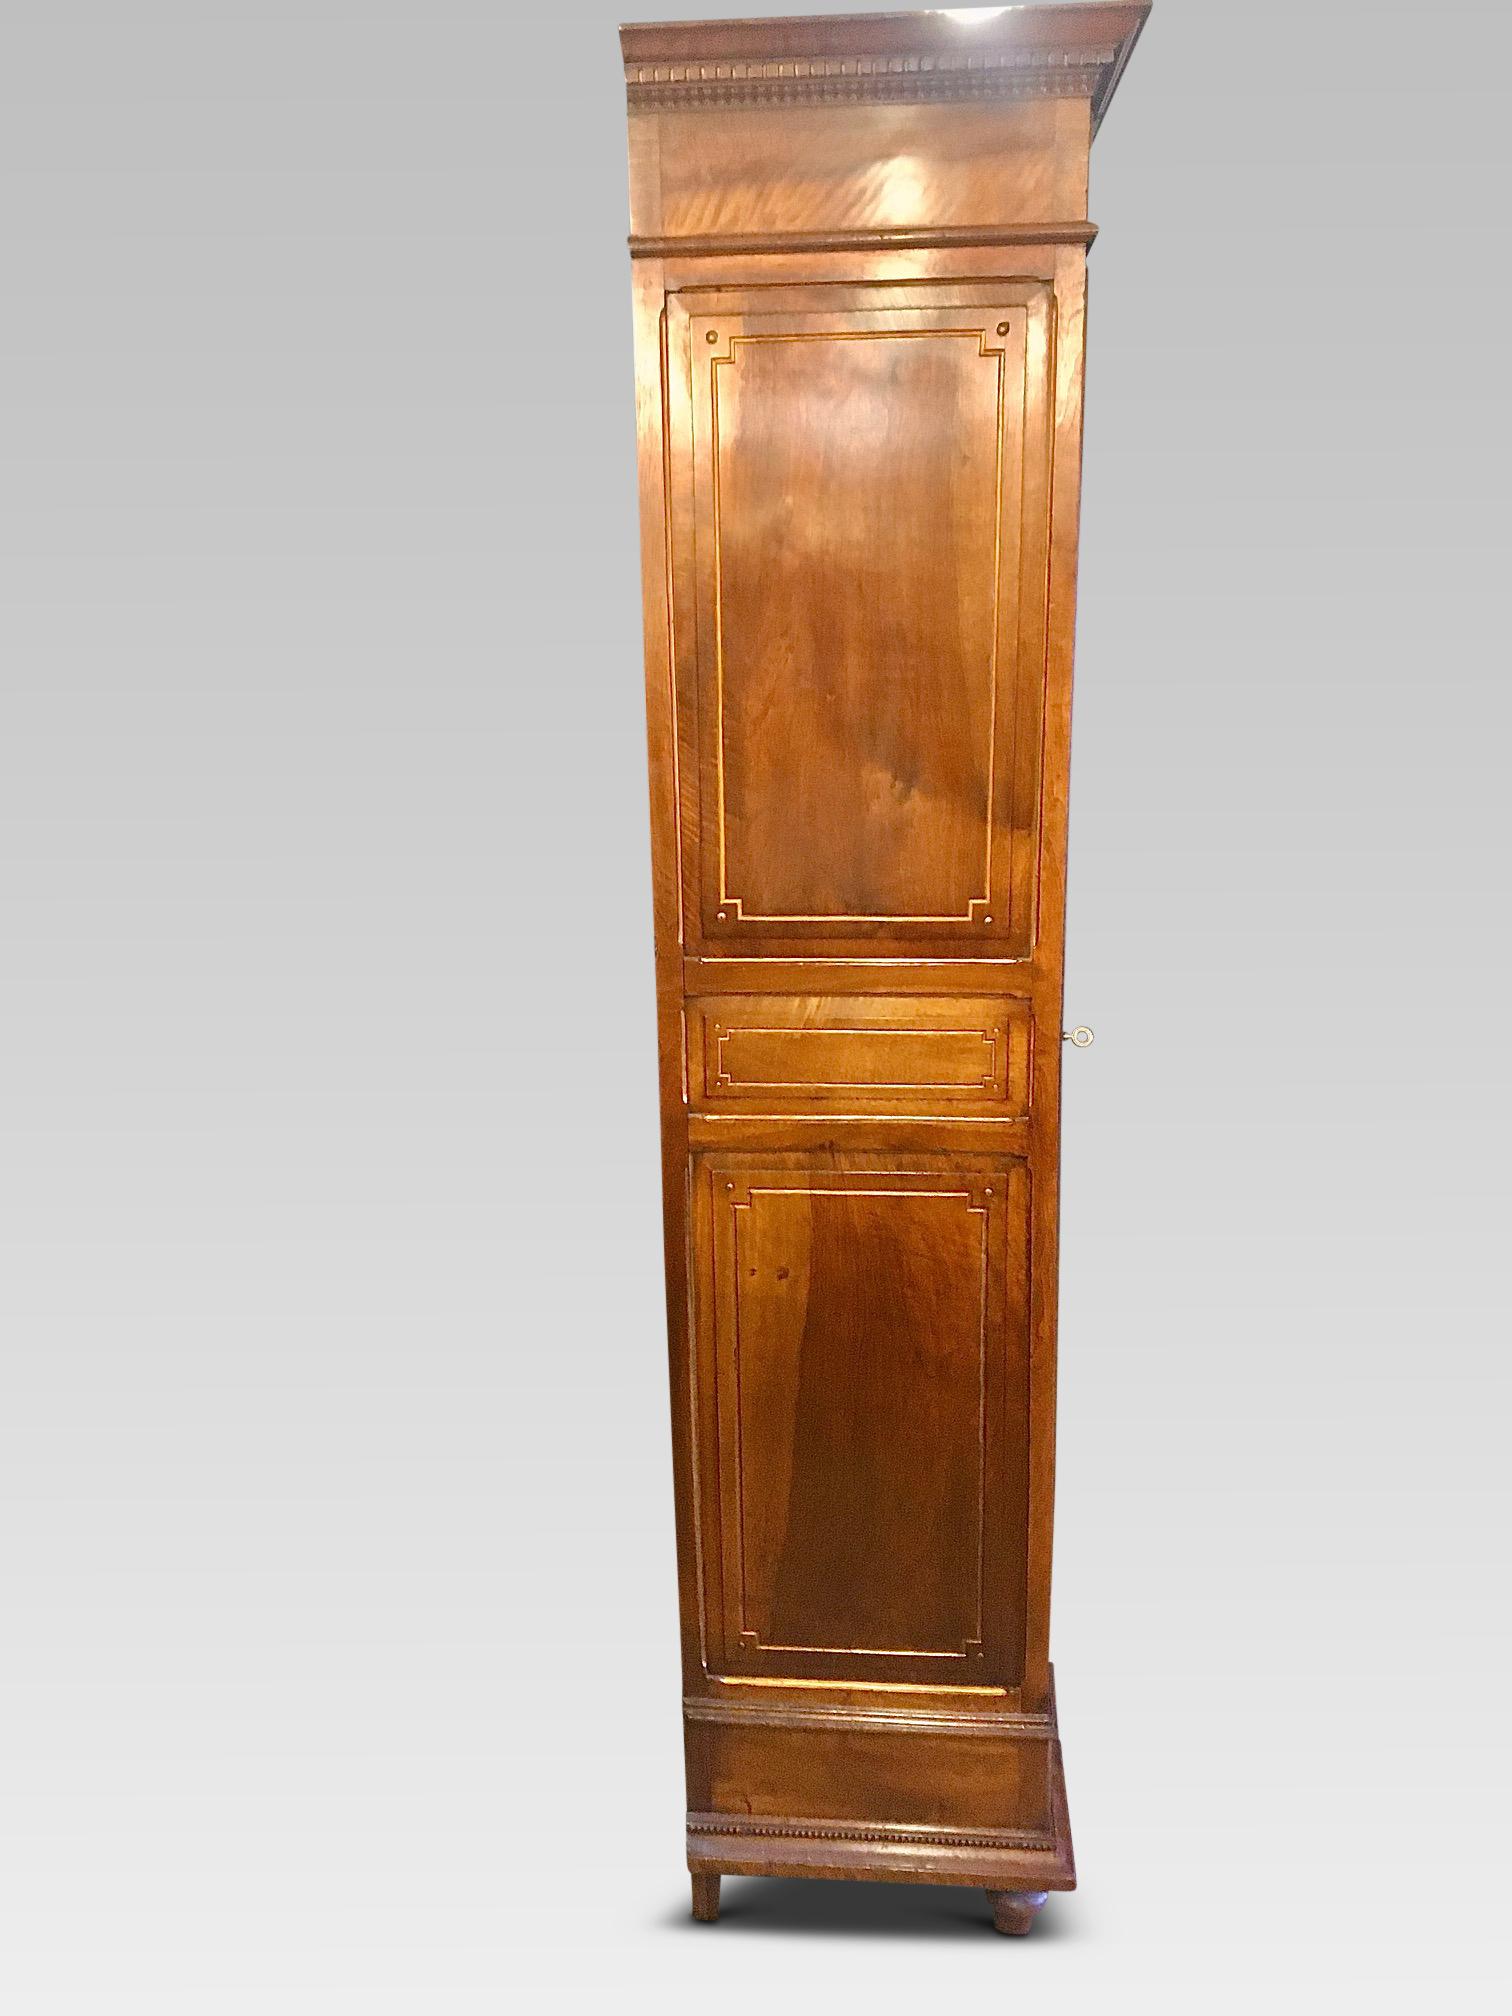 French Provincial Bookcase in Walnut, French, circa 1890